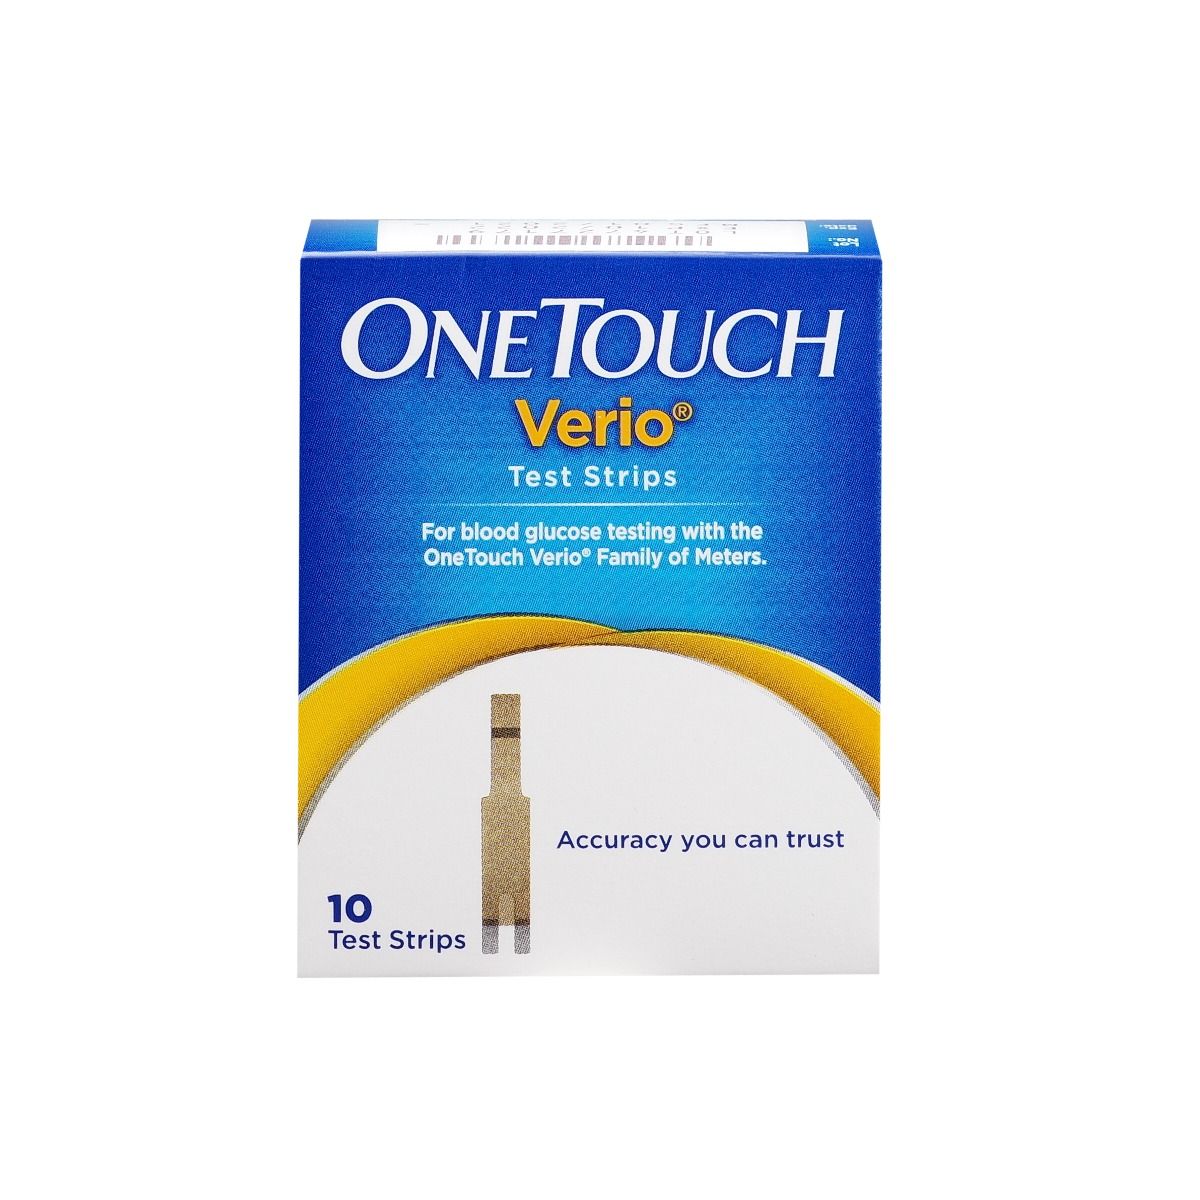 OneTouch Verio Test Strips, 10 Count, Pack of 1 